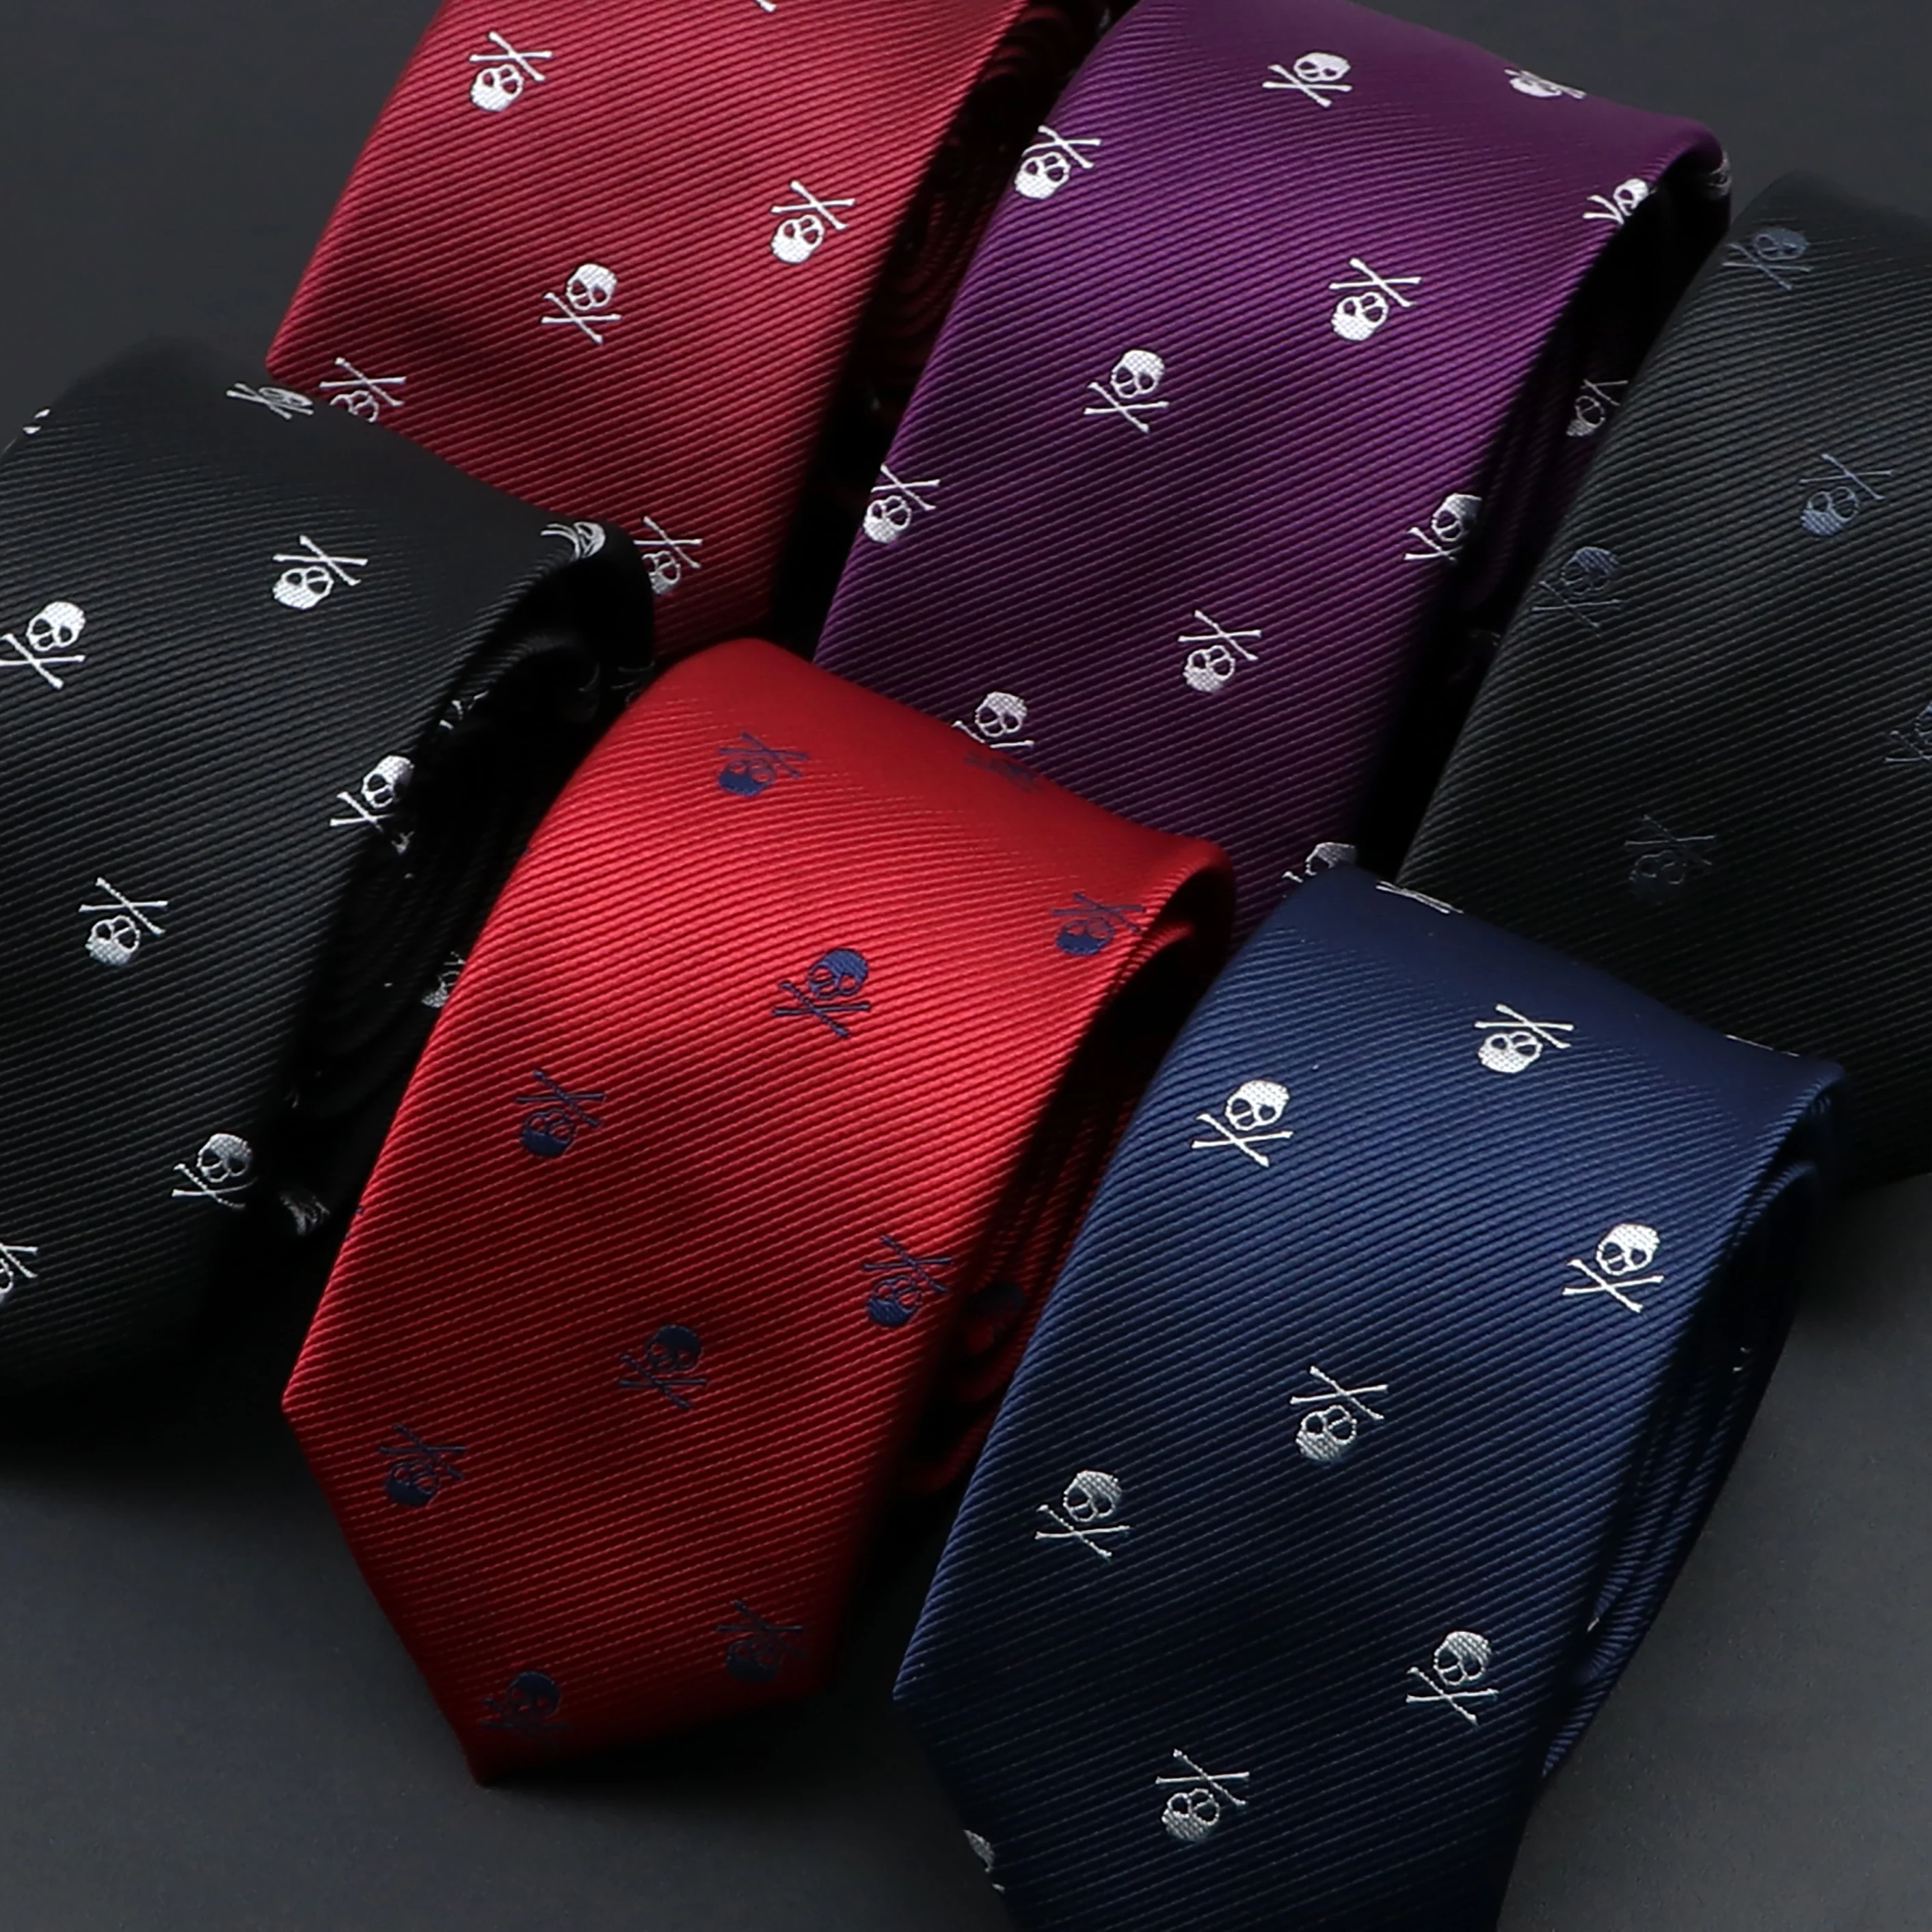 New Casual Slim Skull Ties For Men Classic Polyester Red Blue Neckties Fashion Man Tie for Wedding Party Cosplay Neckwear Tie